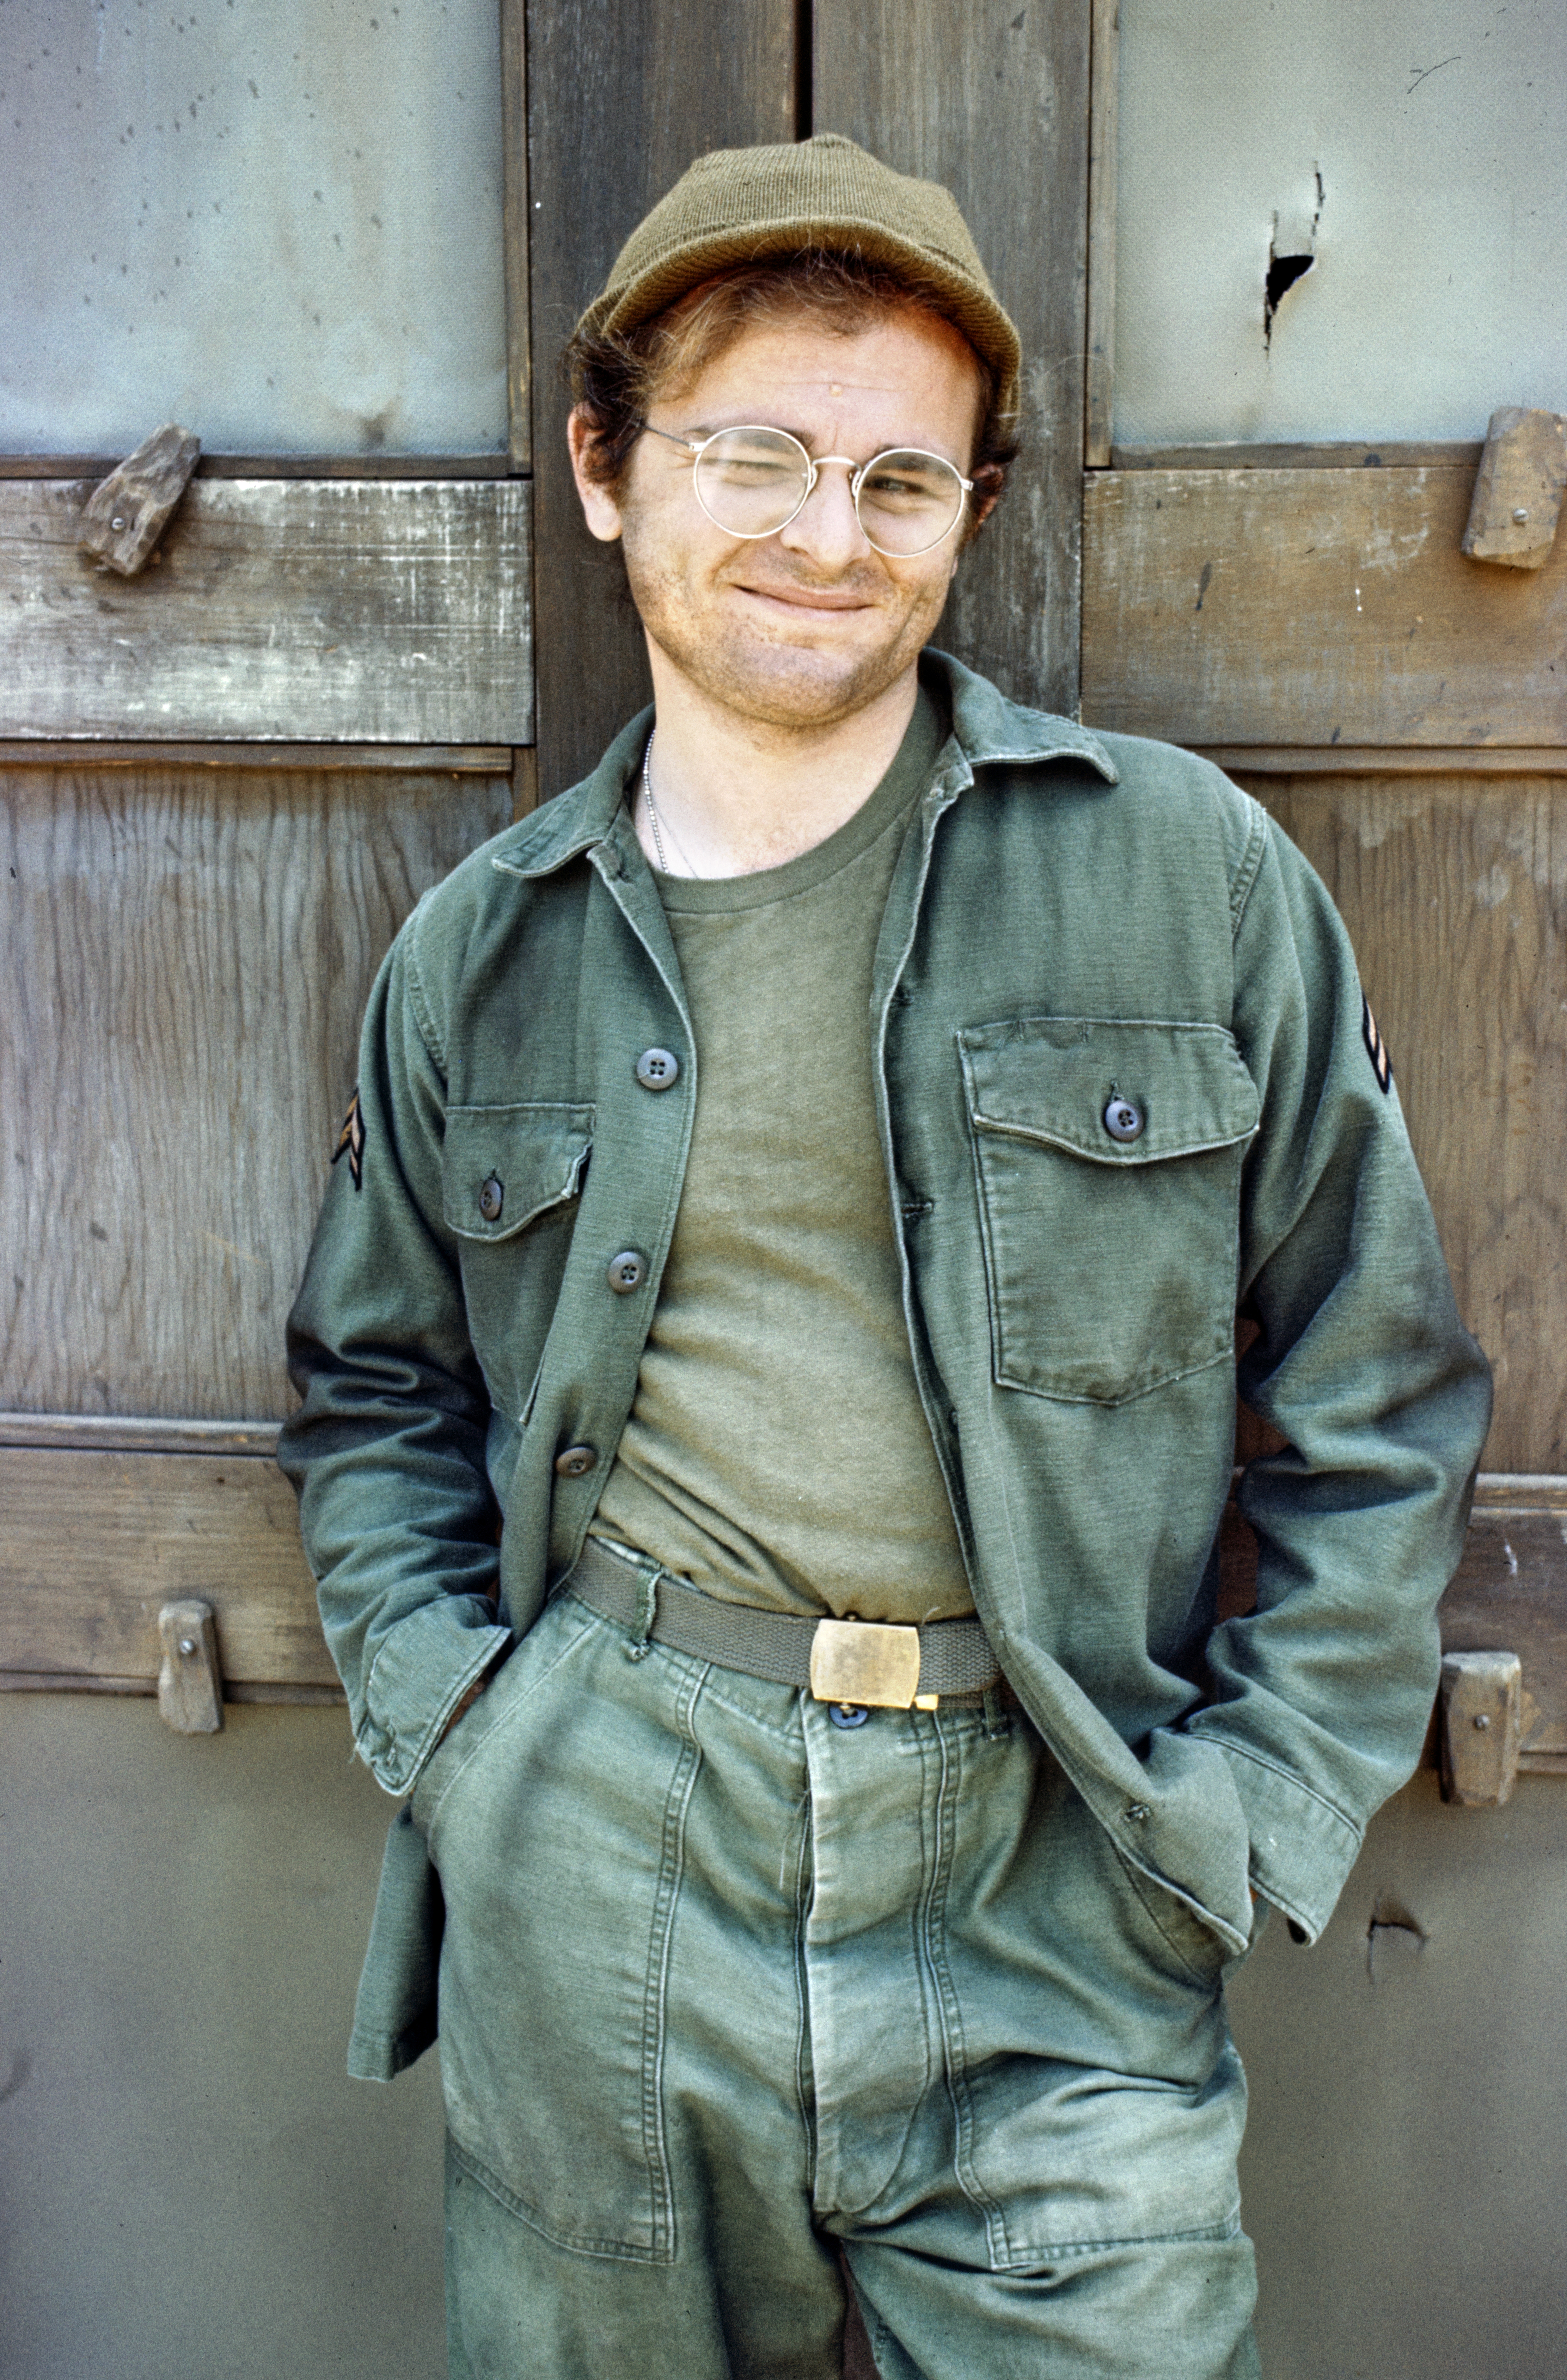 Gary Burghoff as Cpl. Walter "Radar" O'Reilly in the television sitcom "M*A*S*H," circa 1977 | Source: Getty Images